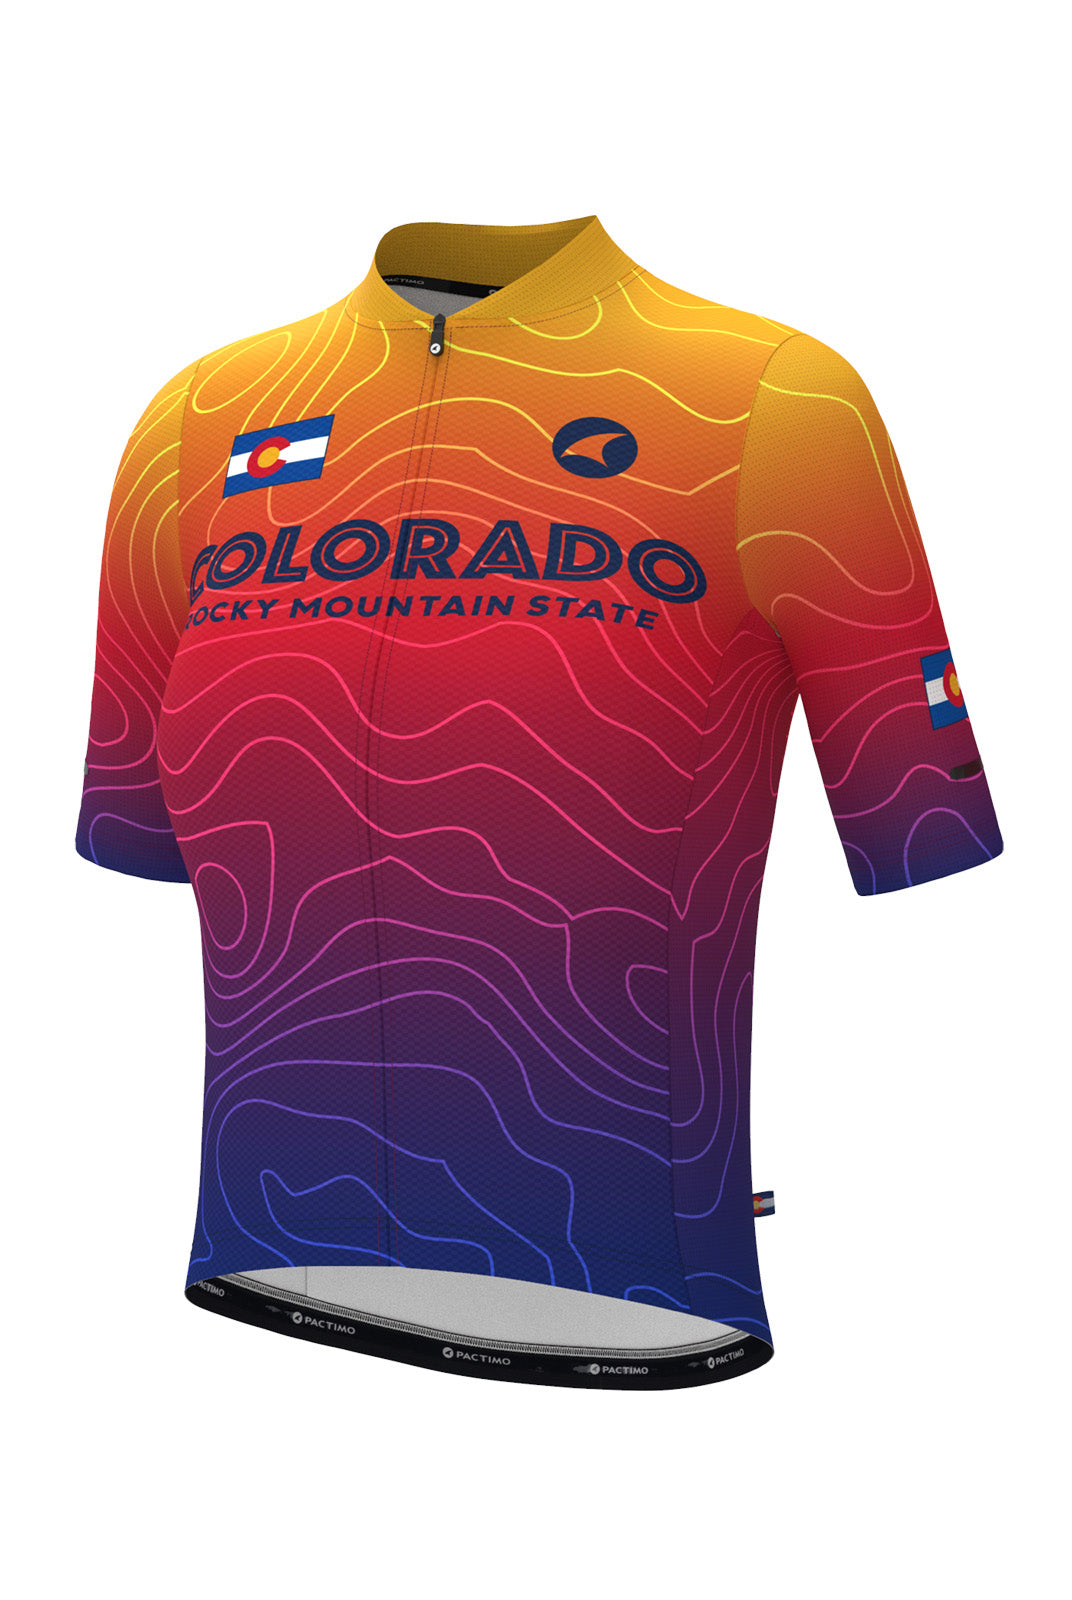 Women's Colorado Cycling Jersey - Ascent Aero Dawn Ombre Front View 